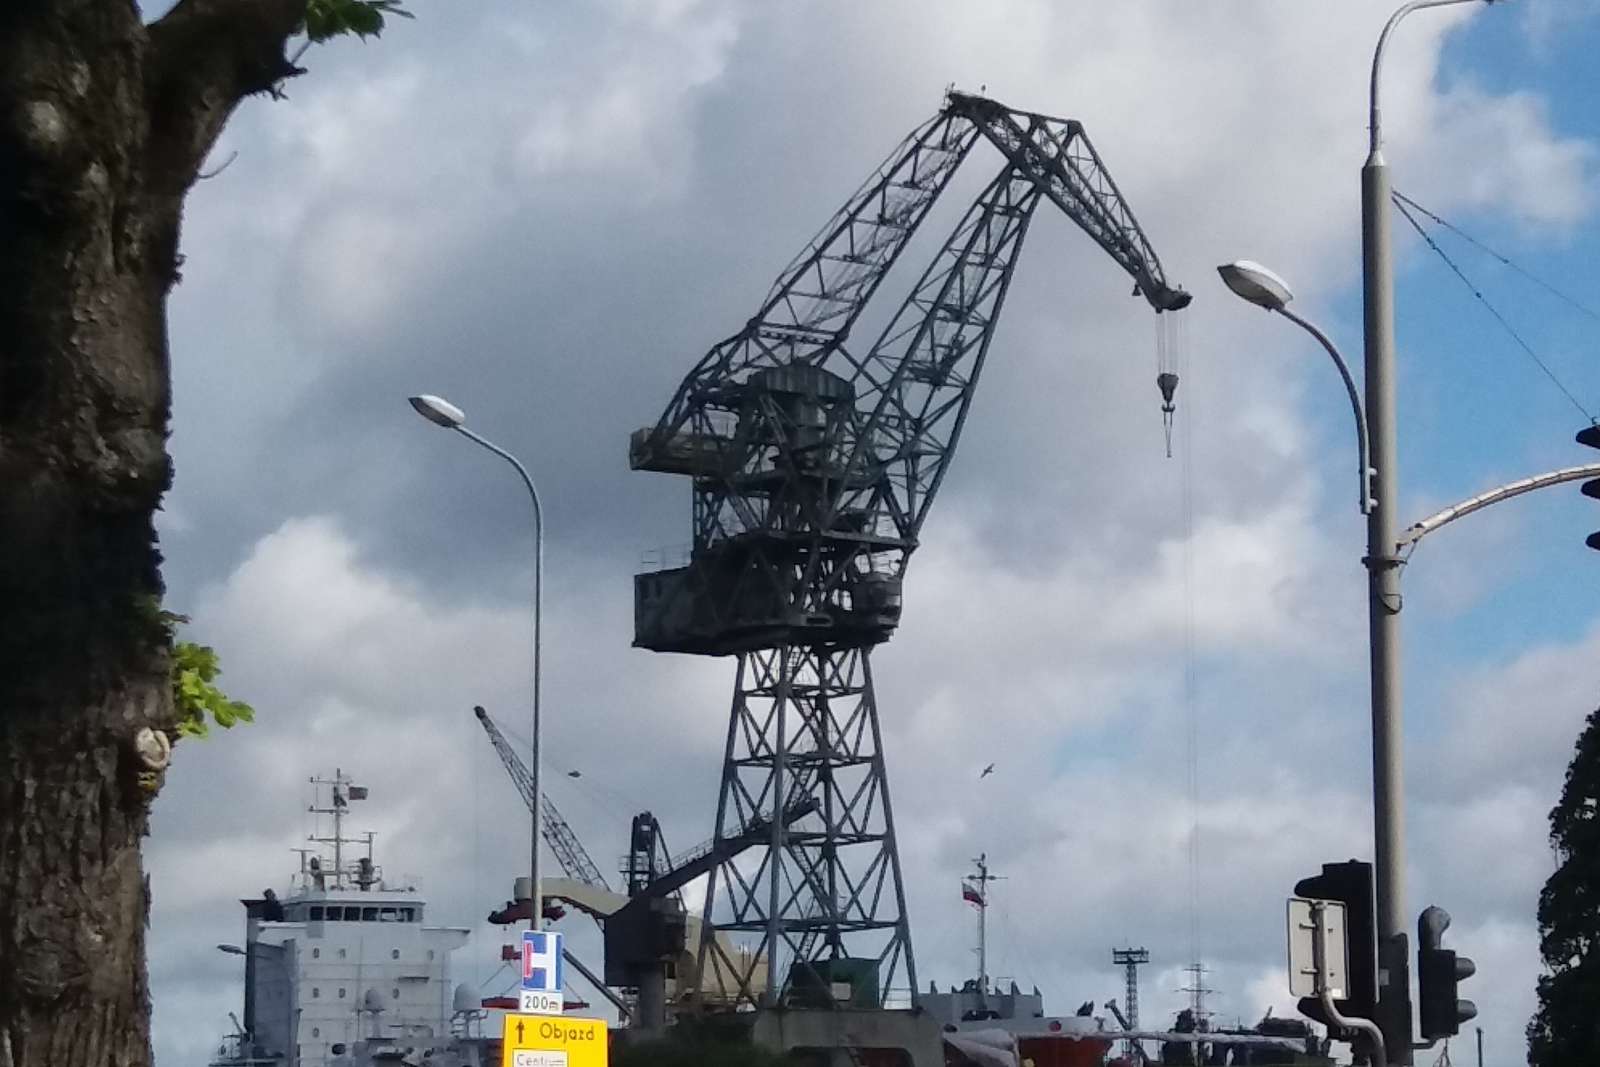 Cranes at the shipyard in Gdansk. jigsaw puzzle online